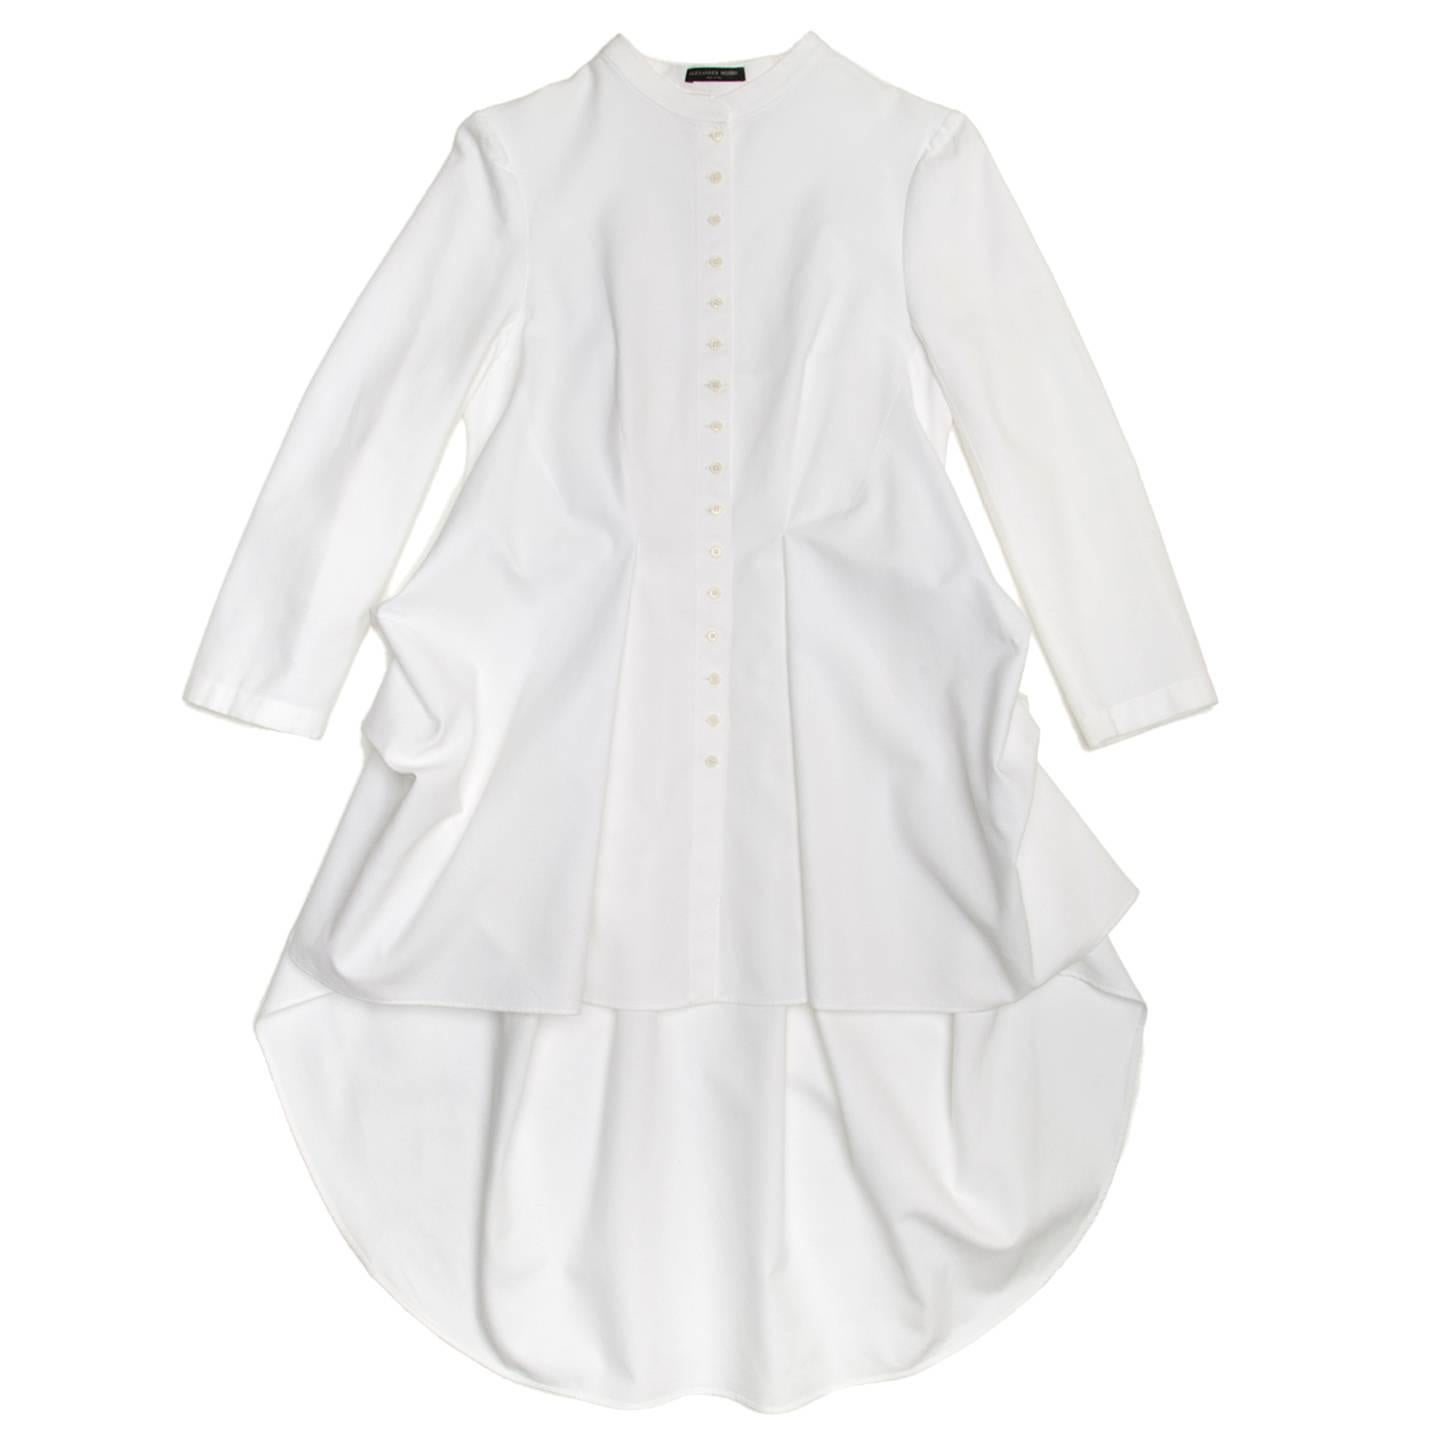 White Edwardian style pique shirt dress with mandarin neck and cuffless sleeves. The back reaches the mid calf and deep pleats create a wide volume, the front is enriched by two inverted pleats as well and the sides are bustled at under hips.

Size 